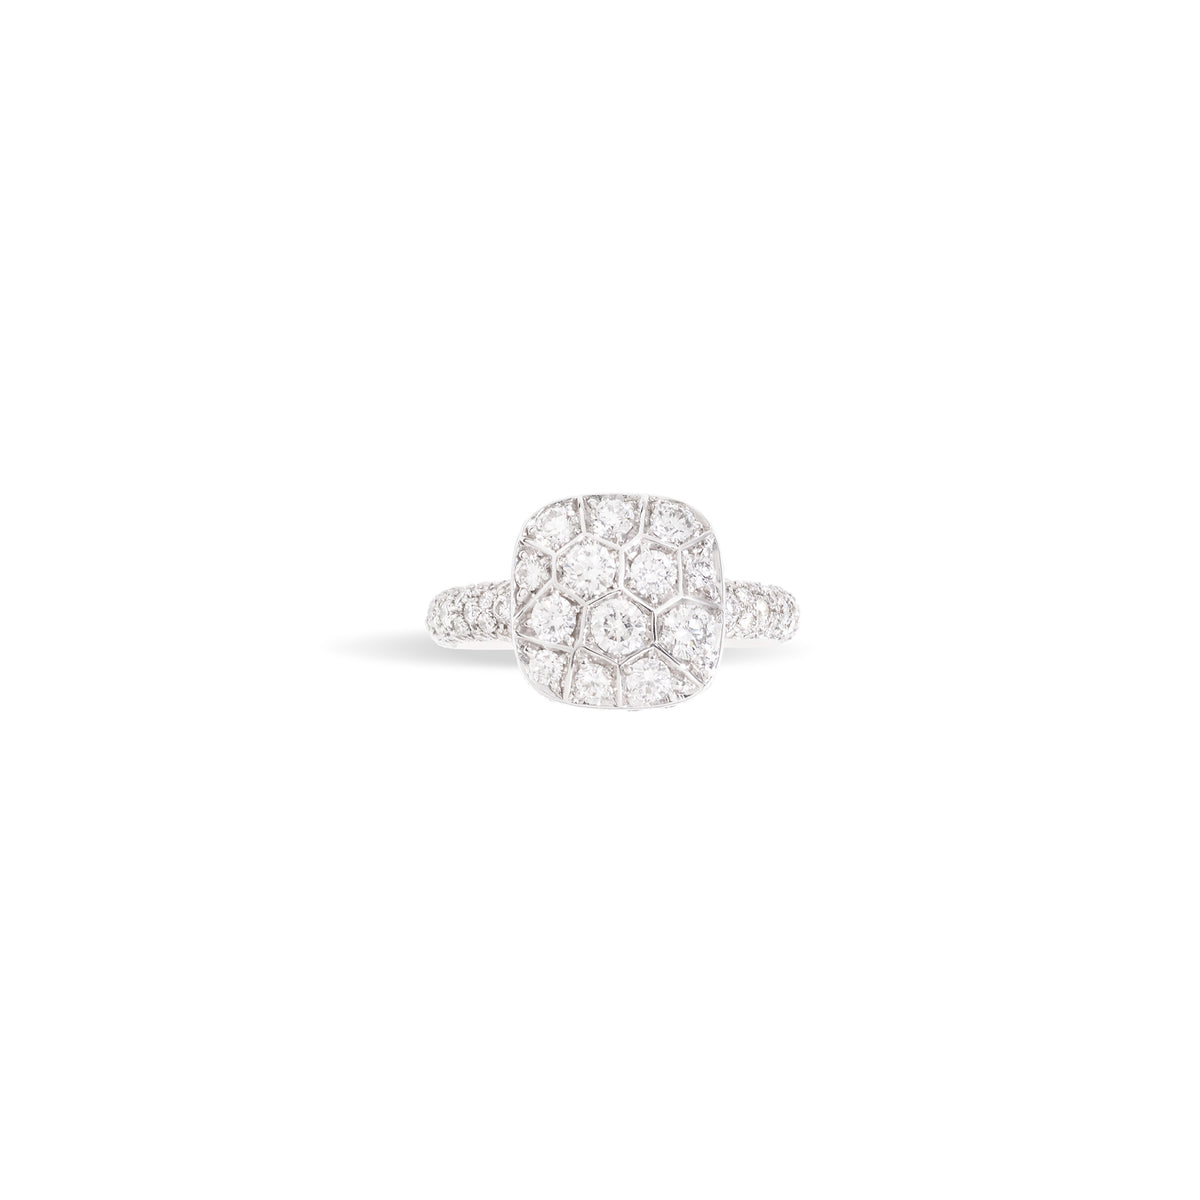 Nudo Maxi Diamond Ring in 18k White Gold and Rose Gold with Diamonds - Orsini Jewellers NZ